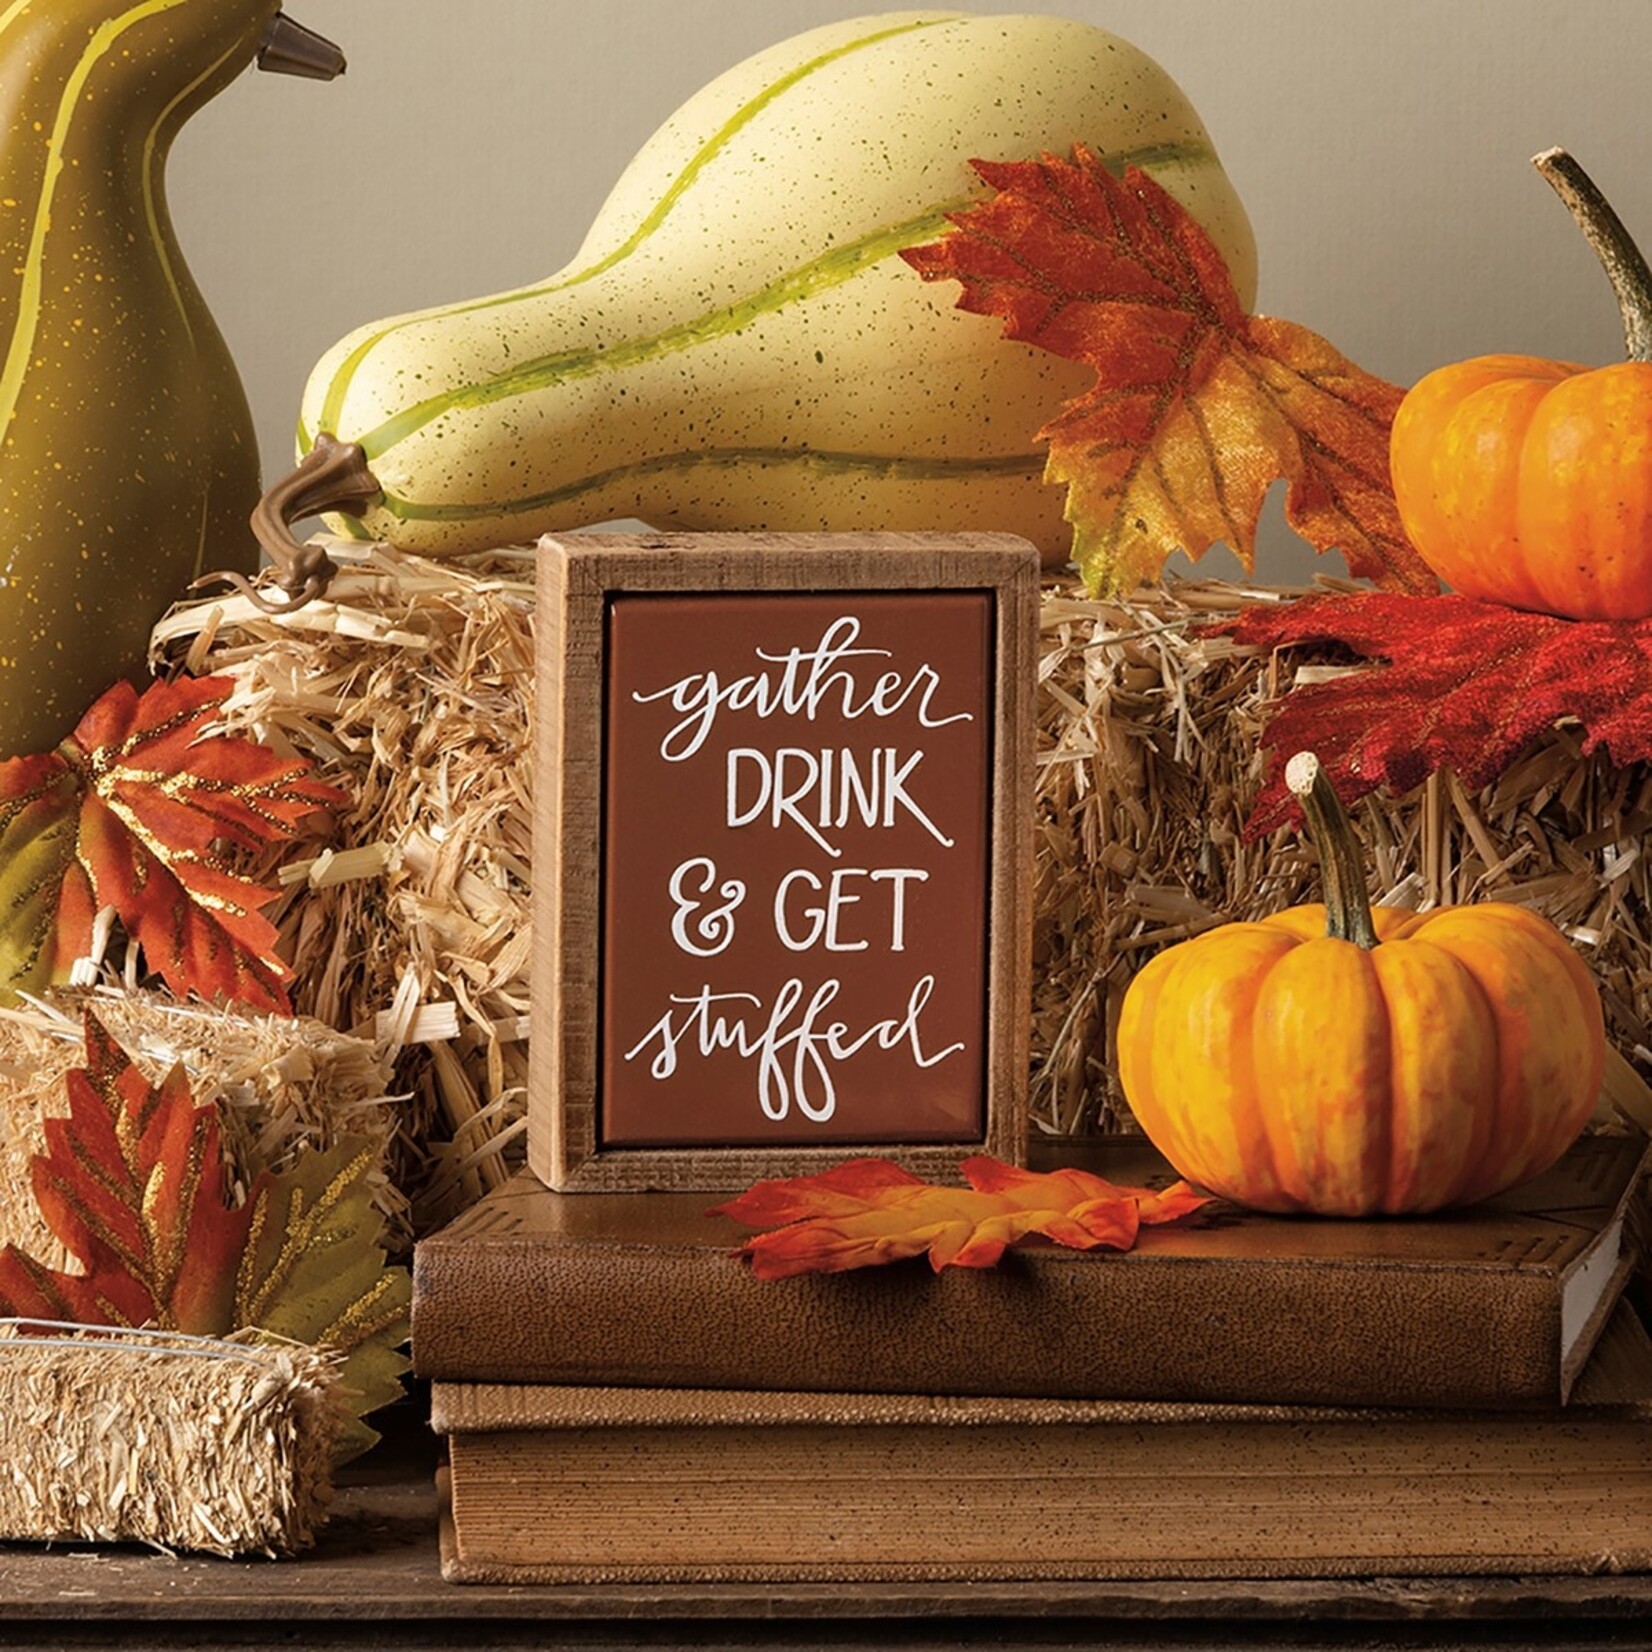 Primitives by Kathy Primitives by Kathy- Gather Drink & Get Stuffed Box Sign Mini